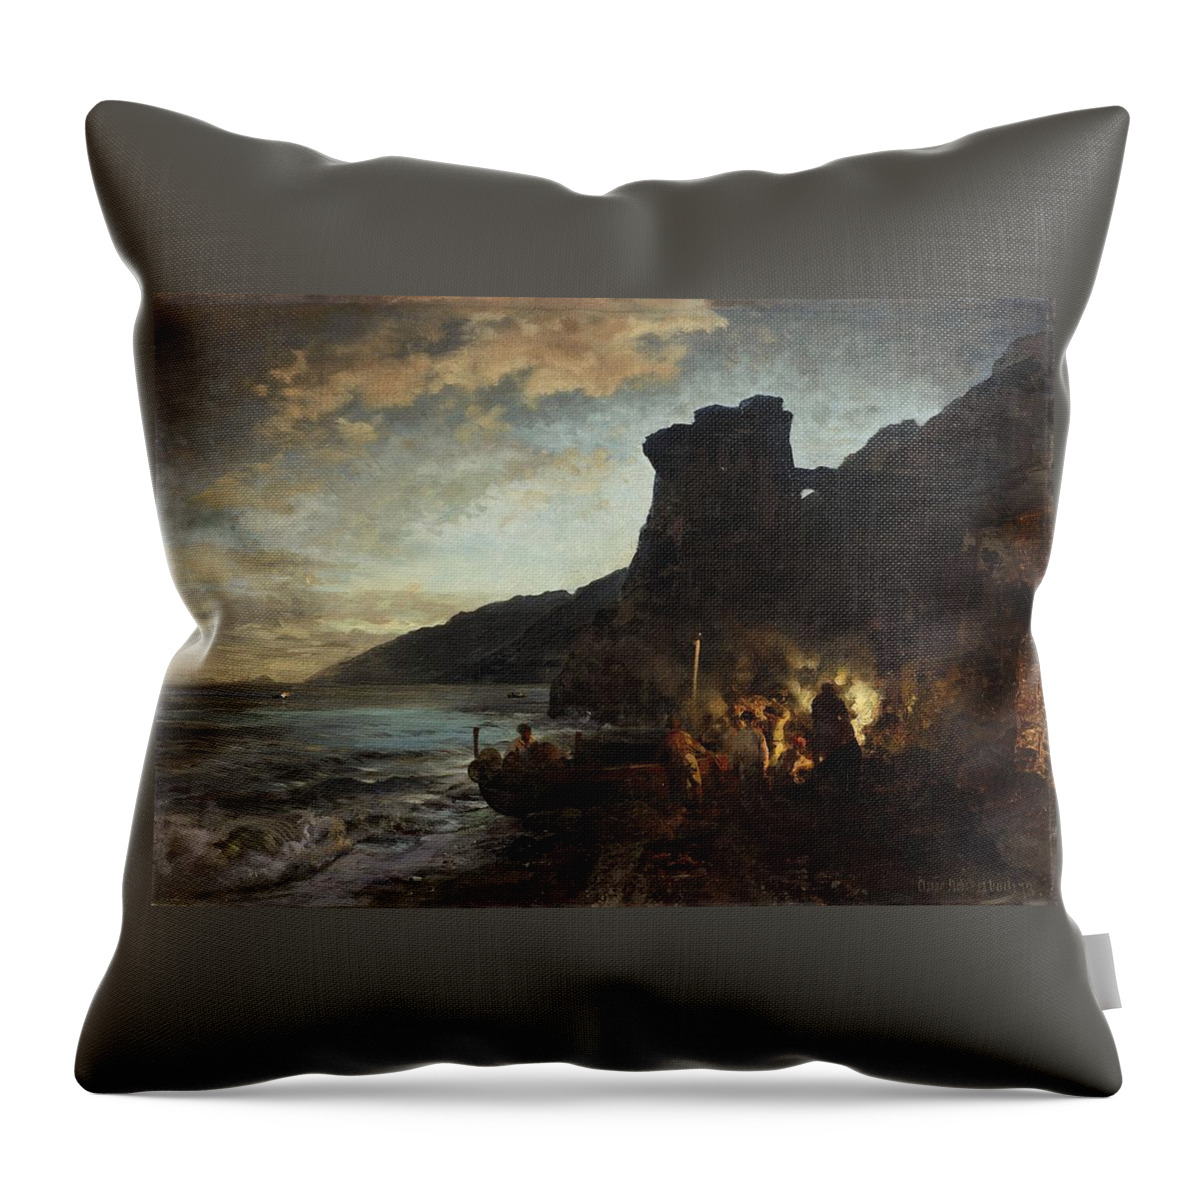 Oswald Achenbach Throw Pillow featuring the painting The Torre De Asturnu By Night by MotionAge Designs